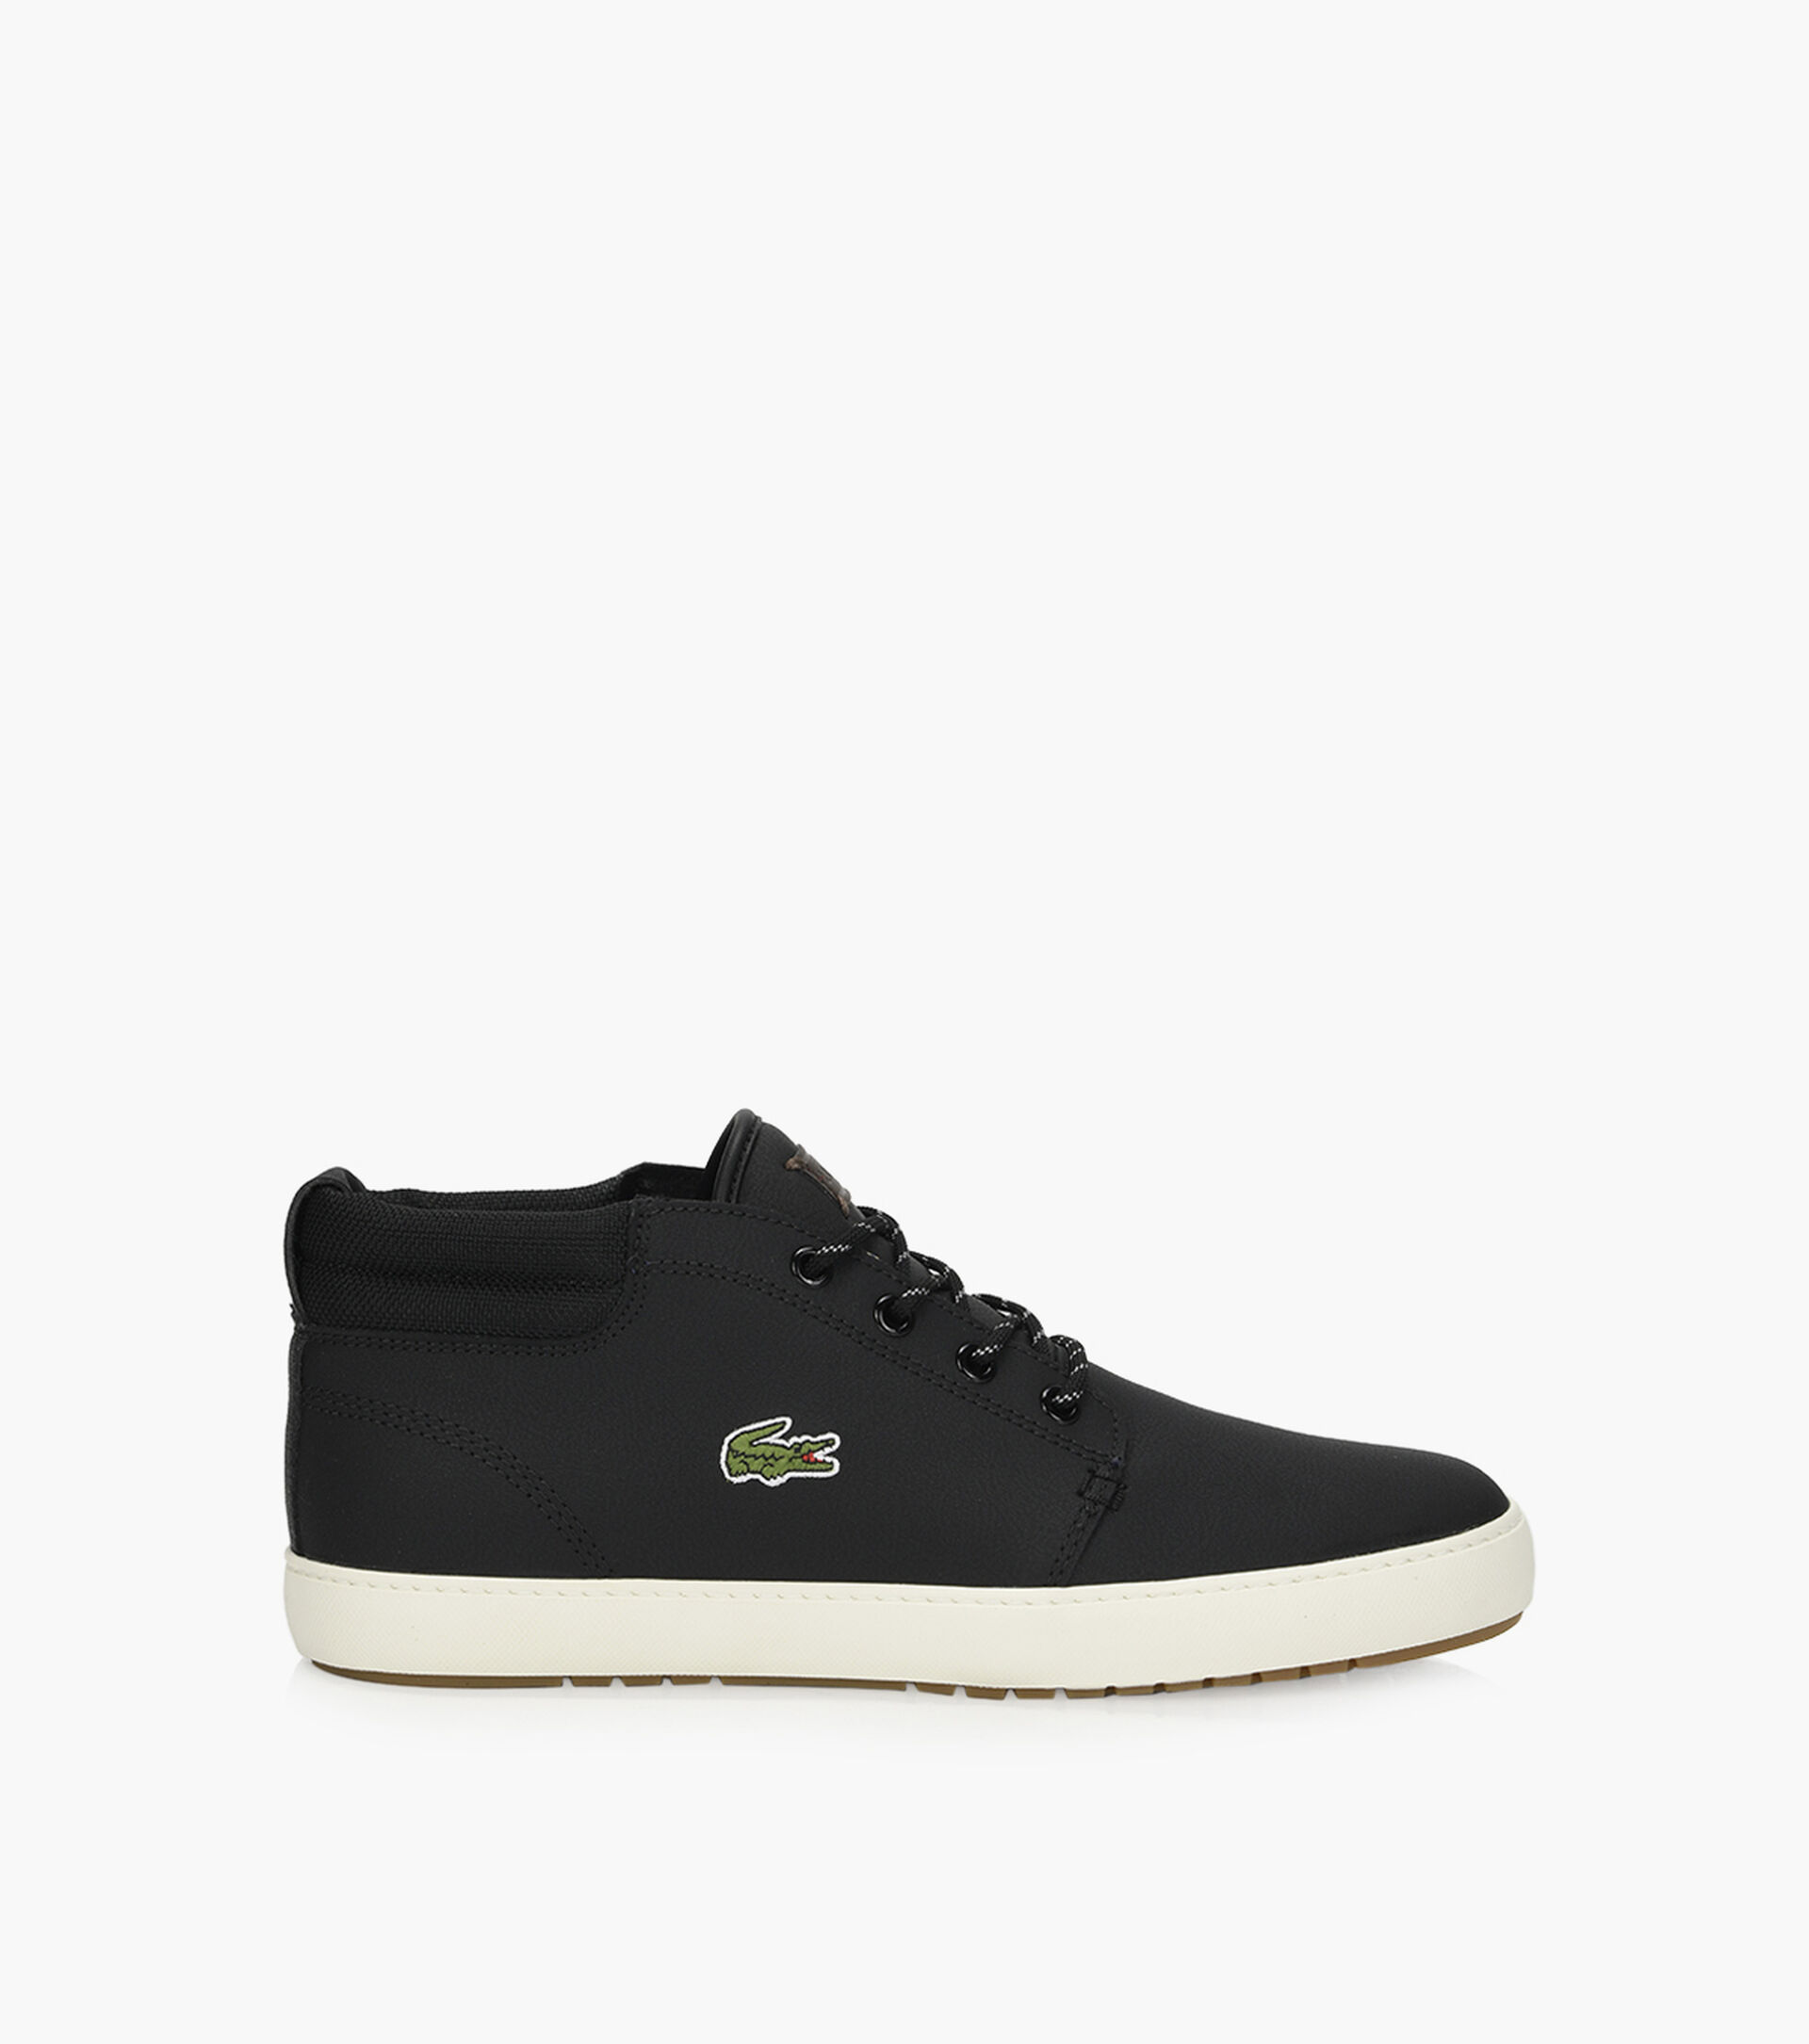 LACOSTE AMPTHILL 319 Black Leather | Browns Shoes